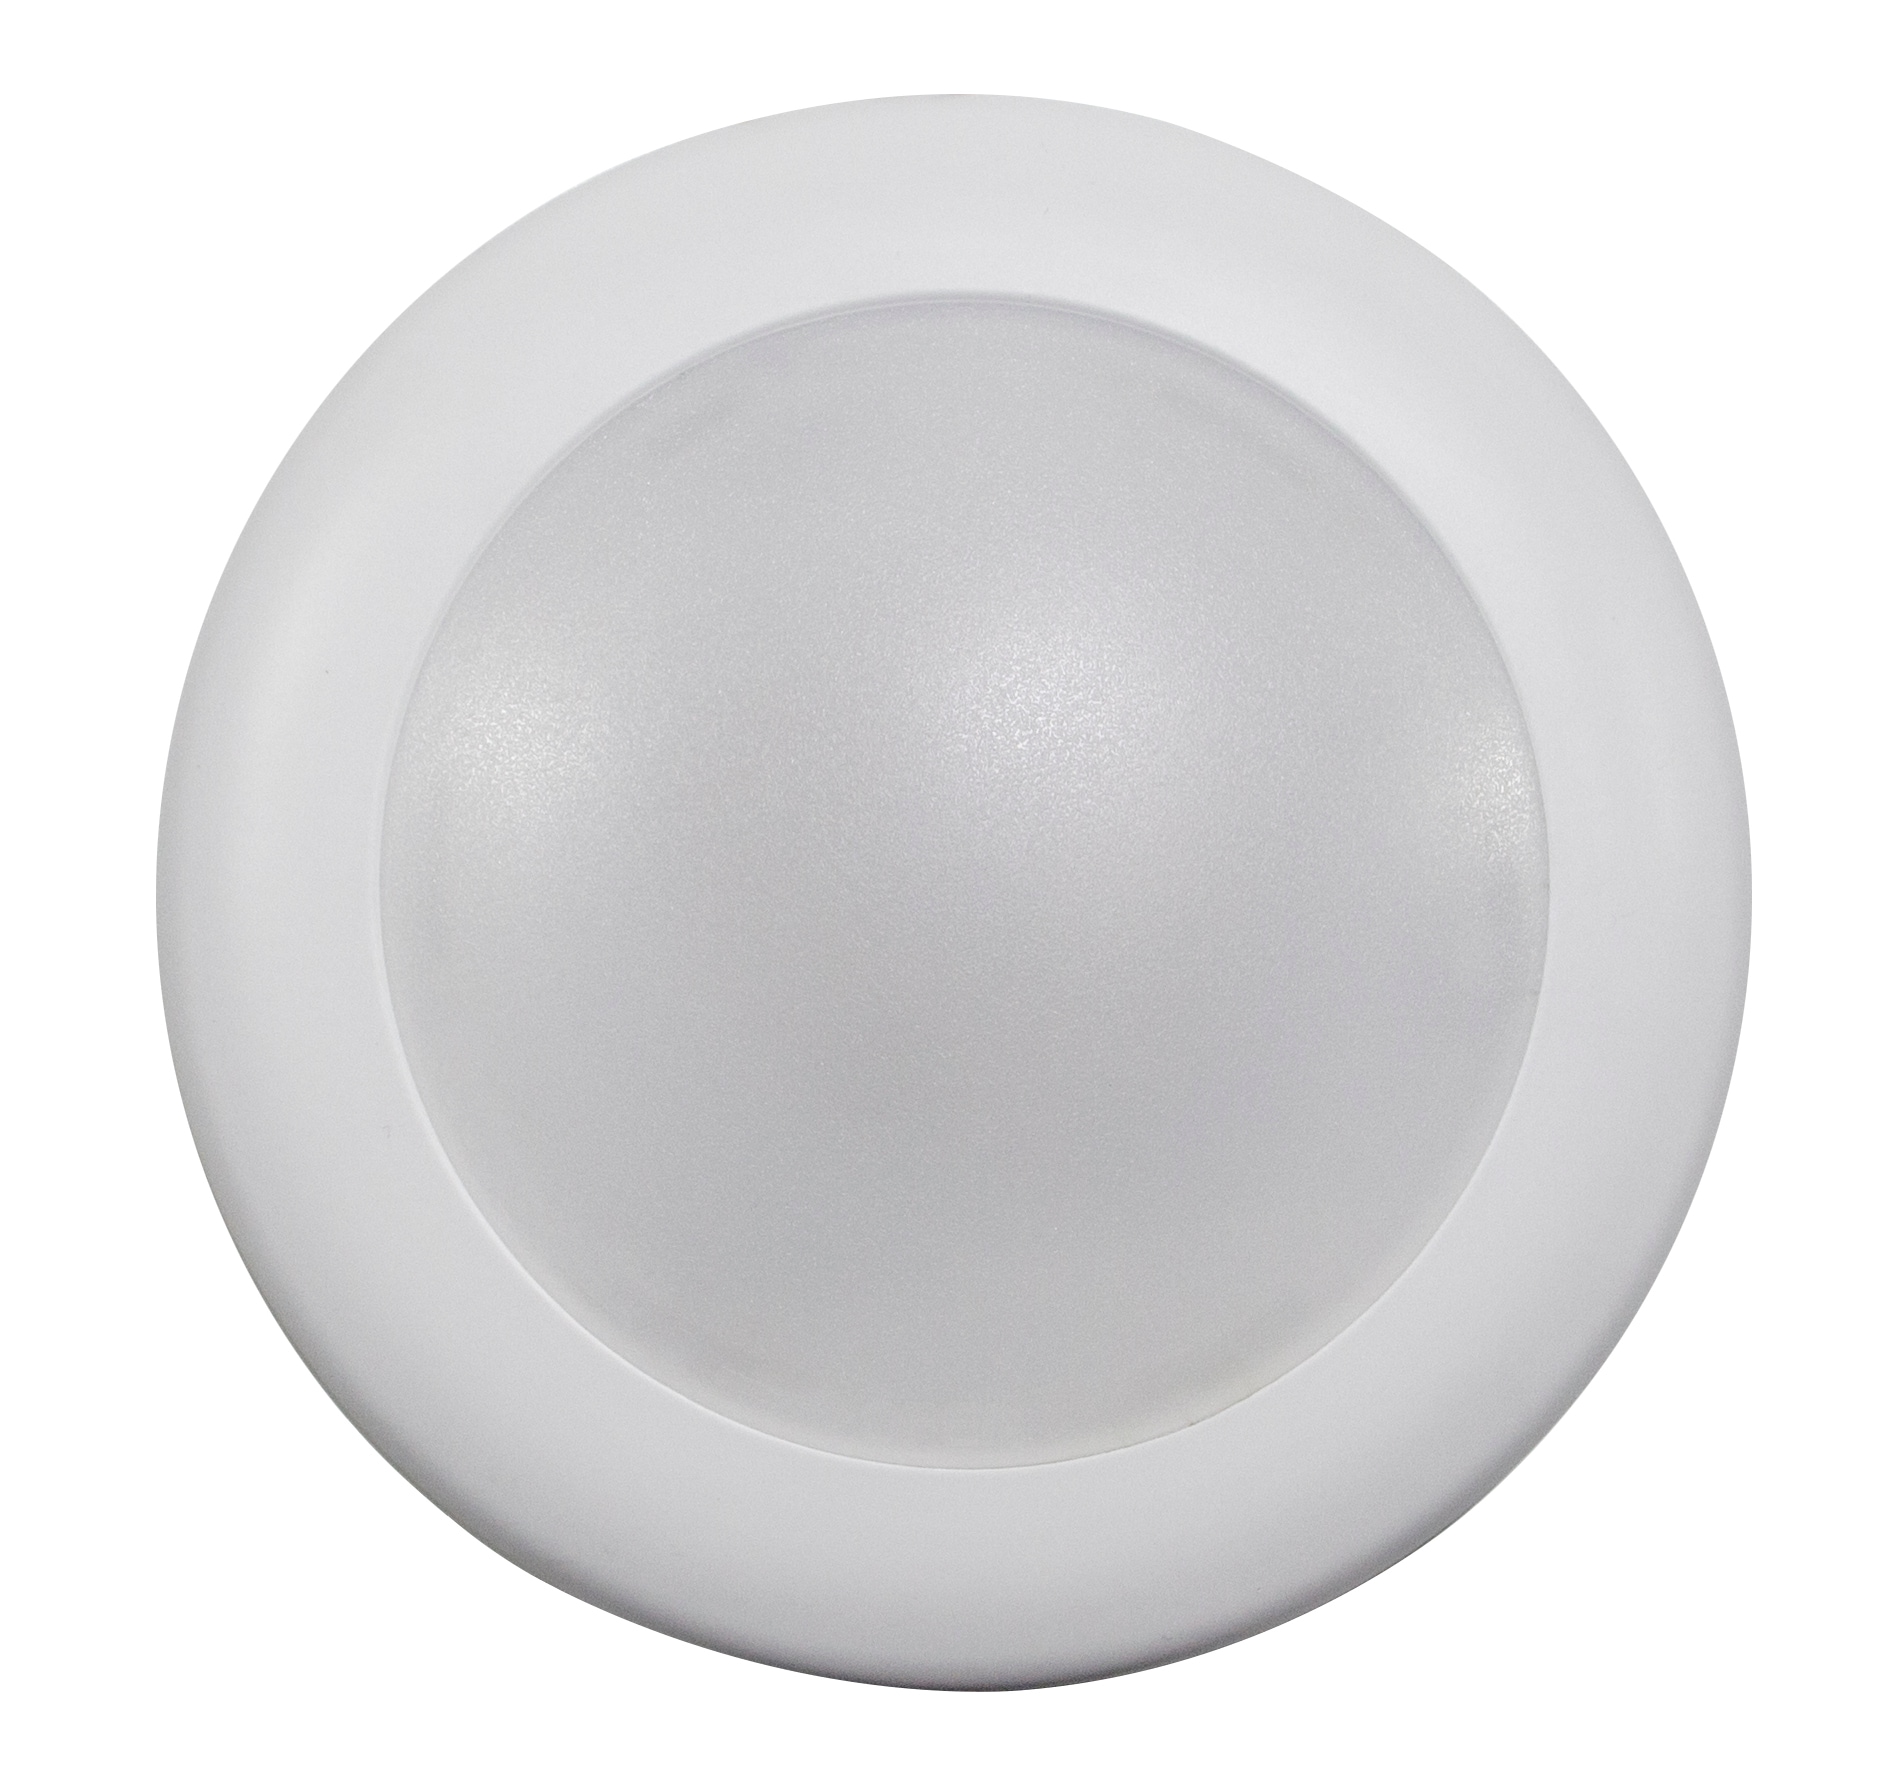 Spitzer Disk light White 5-in or 6-in 1050-Lumen Switchable Round Dimmable LED Canless Recessed Downlight in Recessed Downlights department at Lowes.com